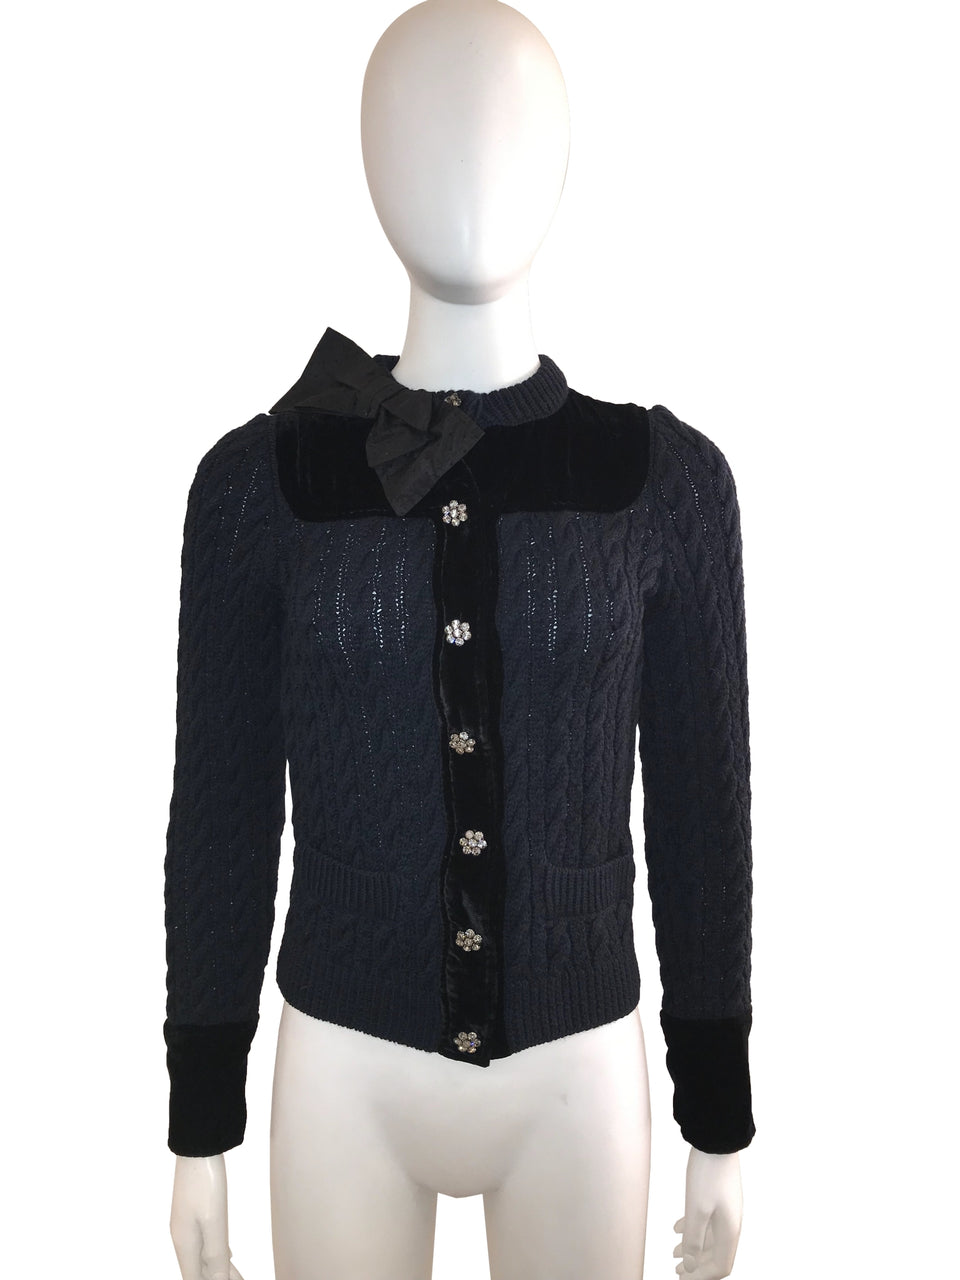 Velvet and Cable Knit Cardigan with Embellished Buttons